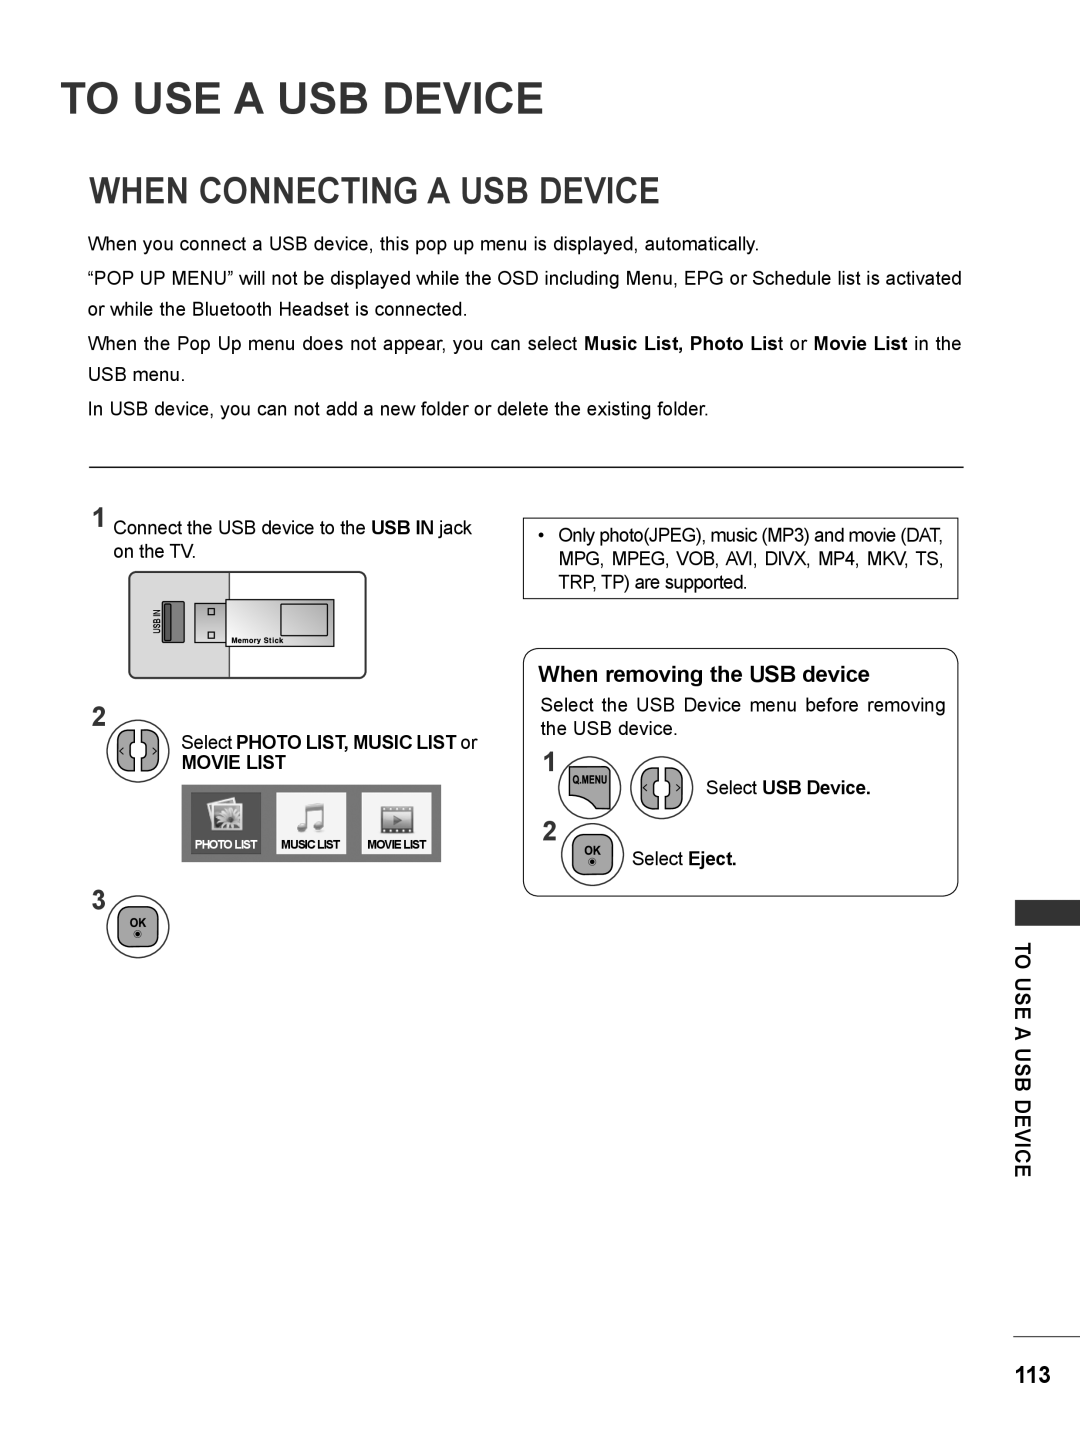 LG Electronics M2280DB To Use A Usb Device, When Connecting A Usb Device, When removing the USB device, Select USB Device 